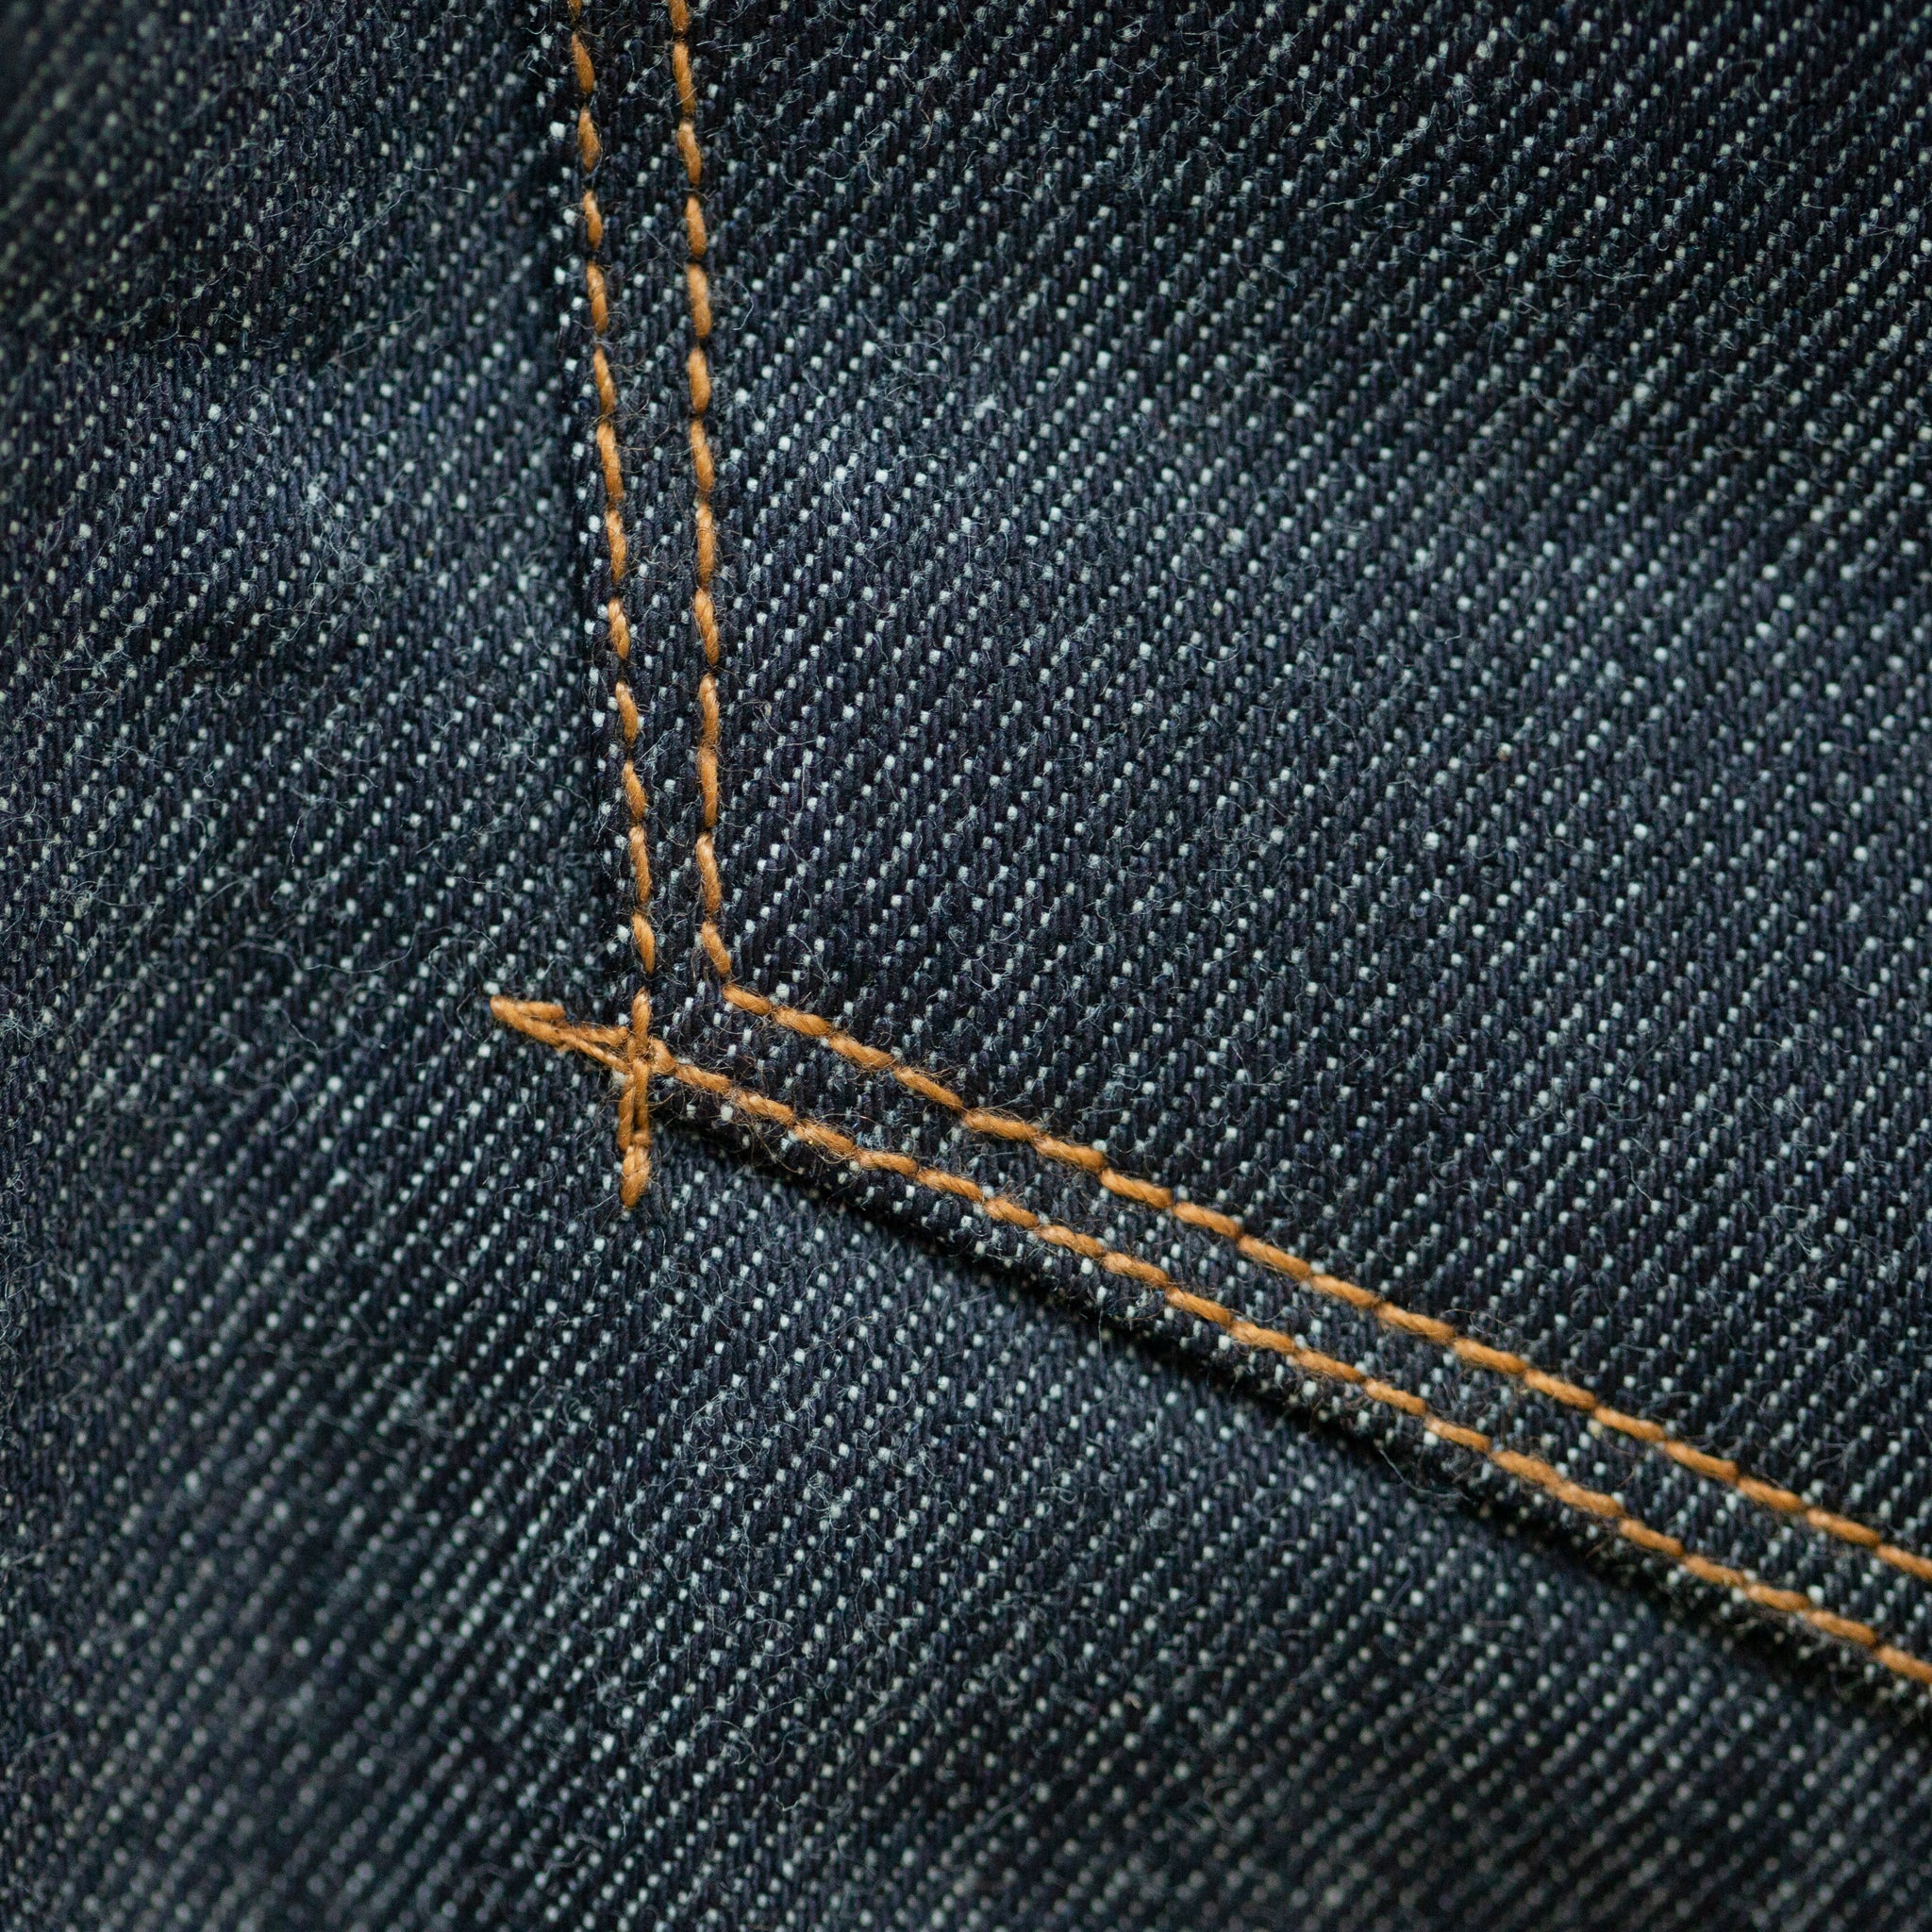 Alexander: Selvage Raw  New American